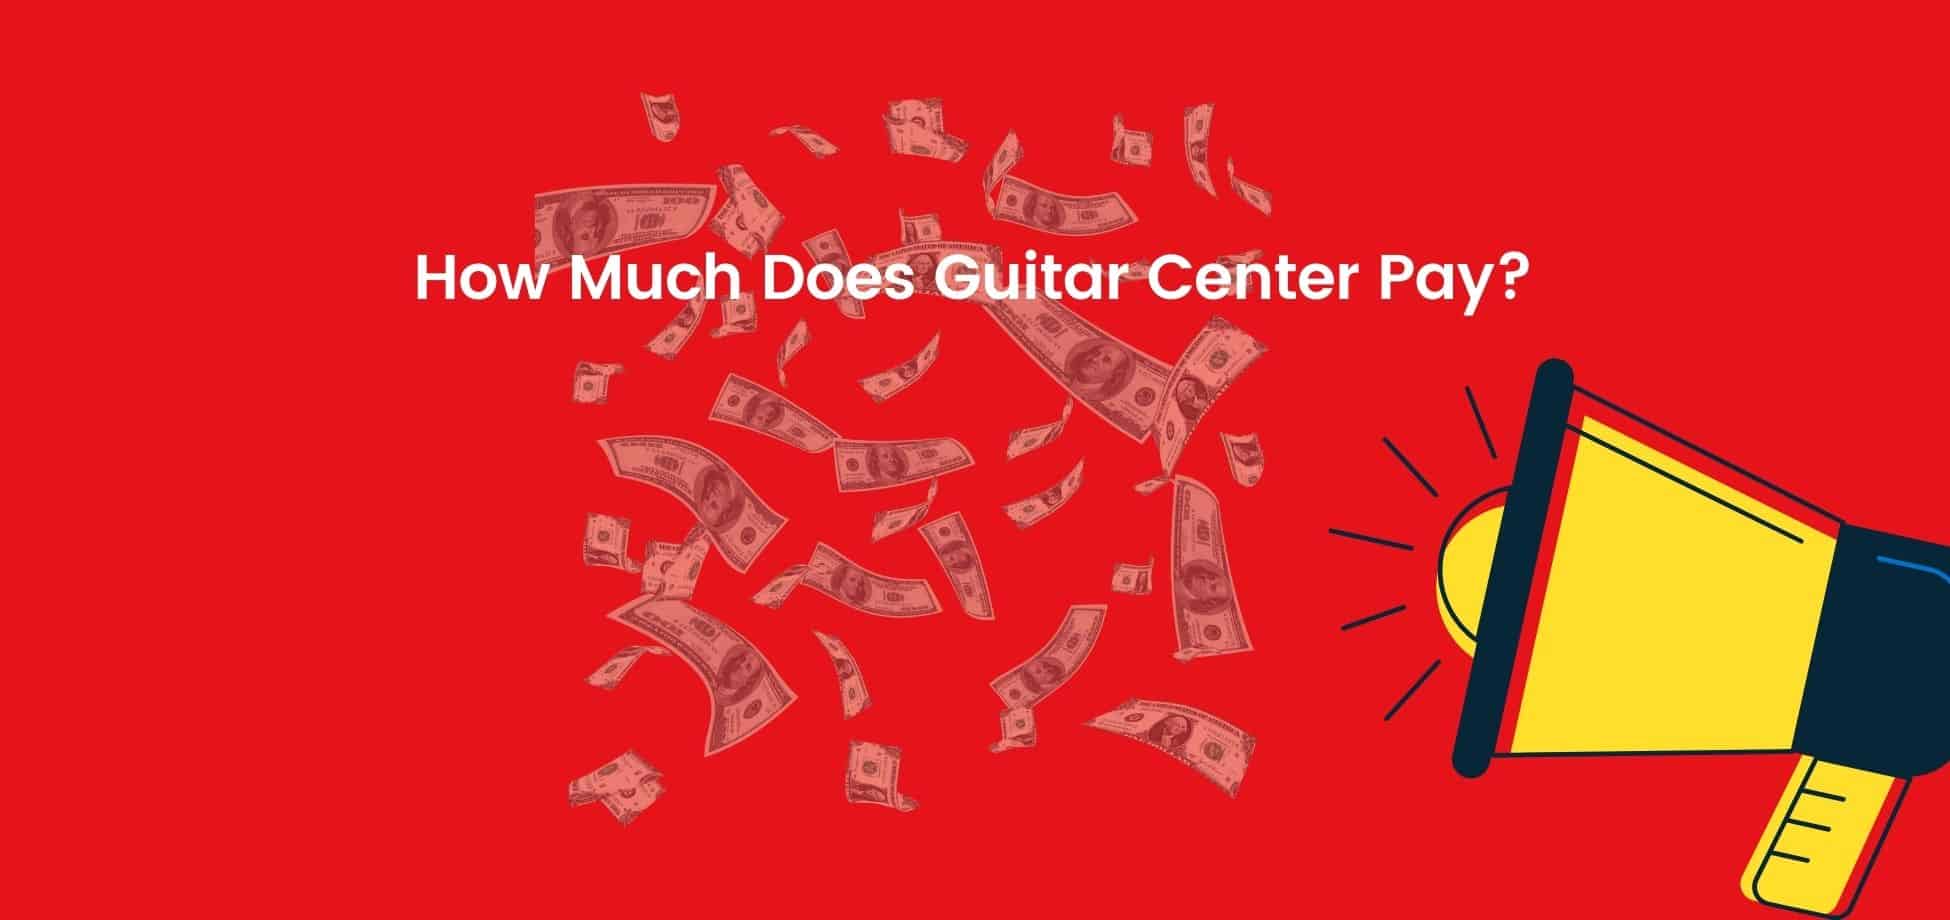 See the Guitar Center starting pay.